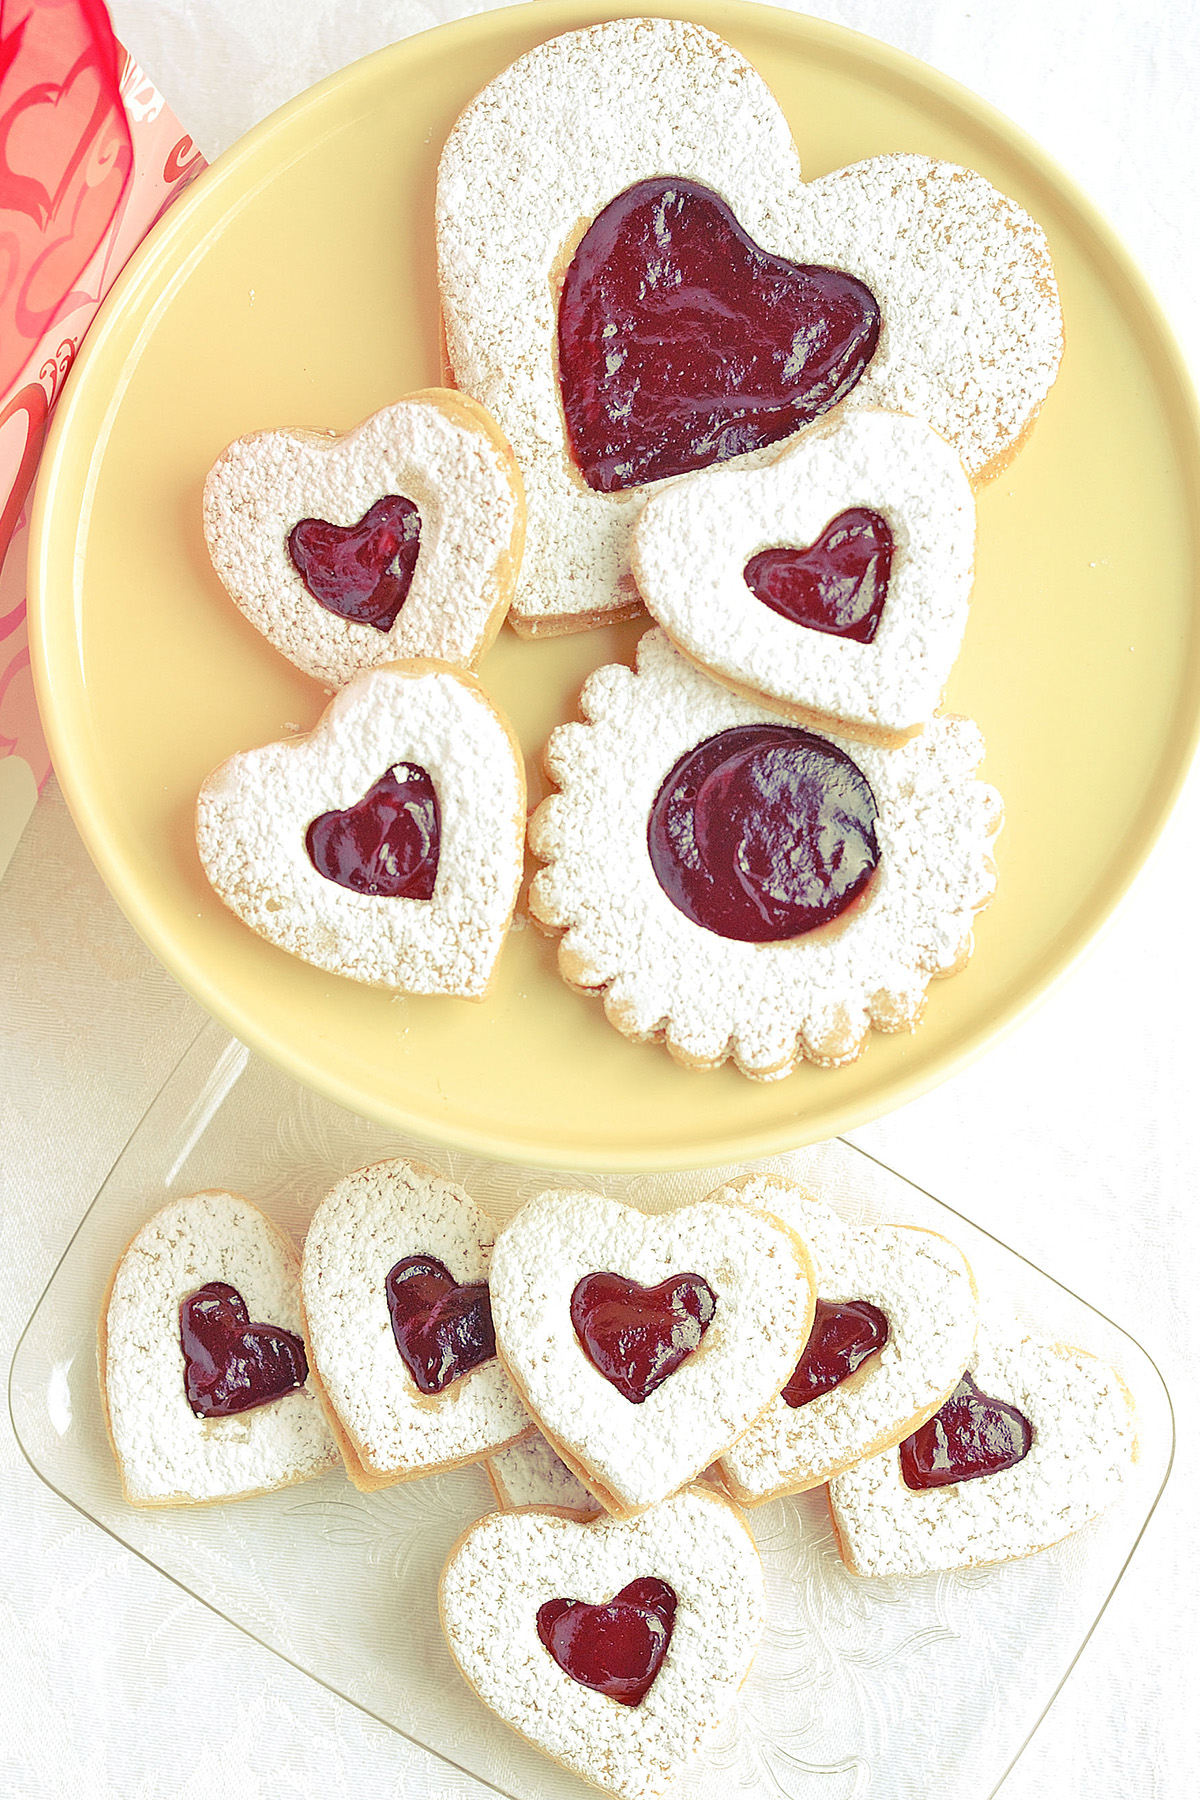 Raspberry Linzer cookies on a yellow plate.